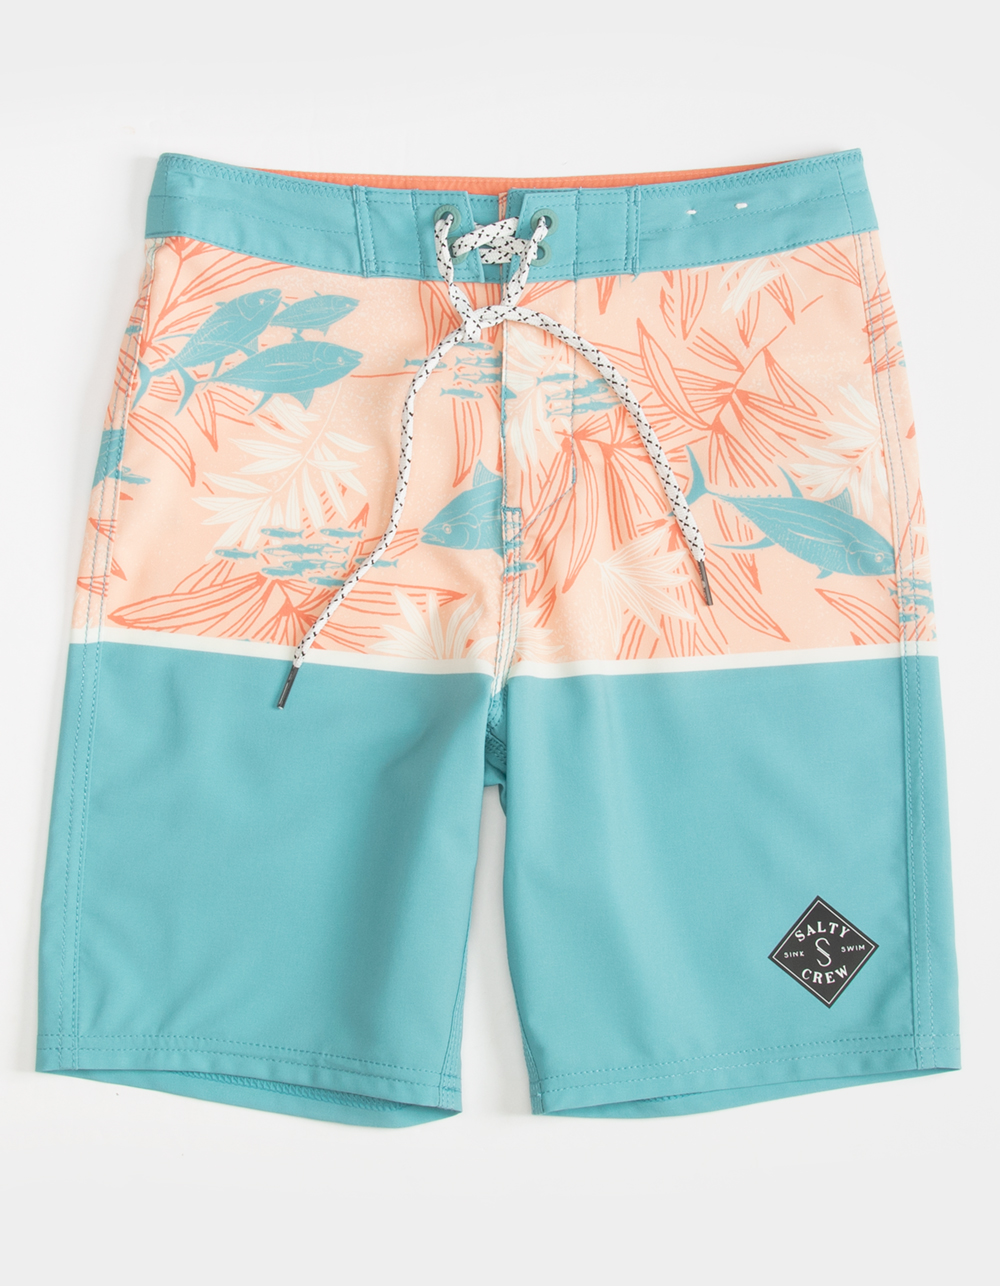 Salty Crew Fisher Solid Boardshorts Charcoal 32